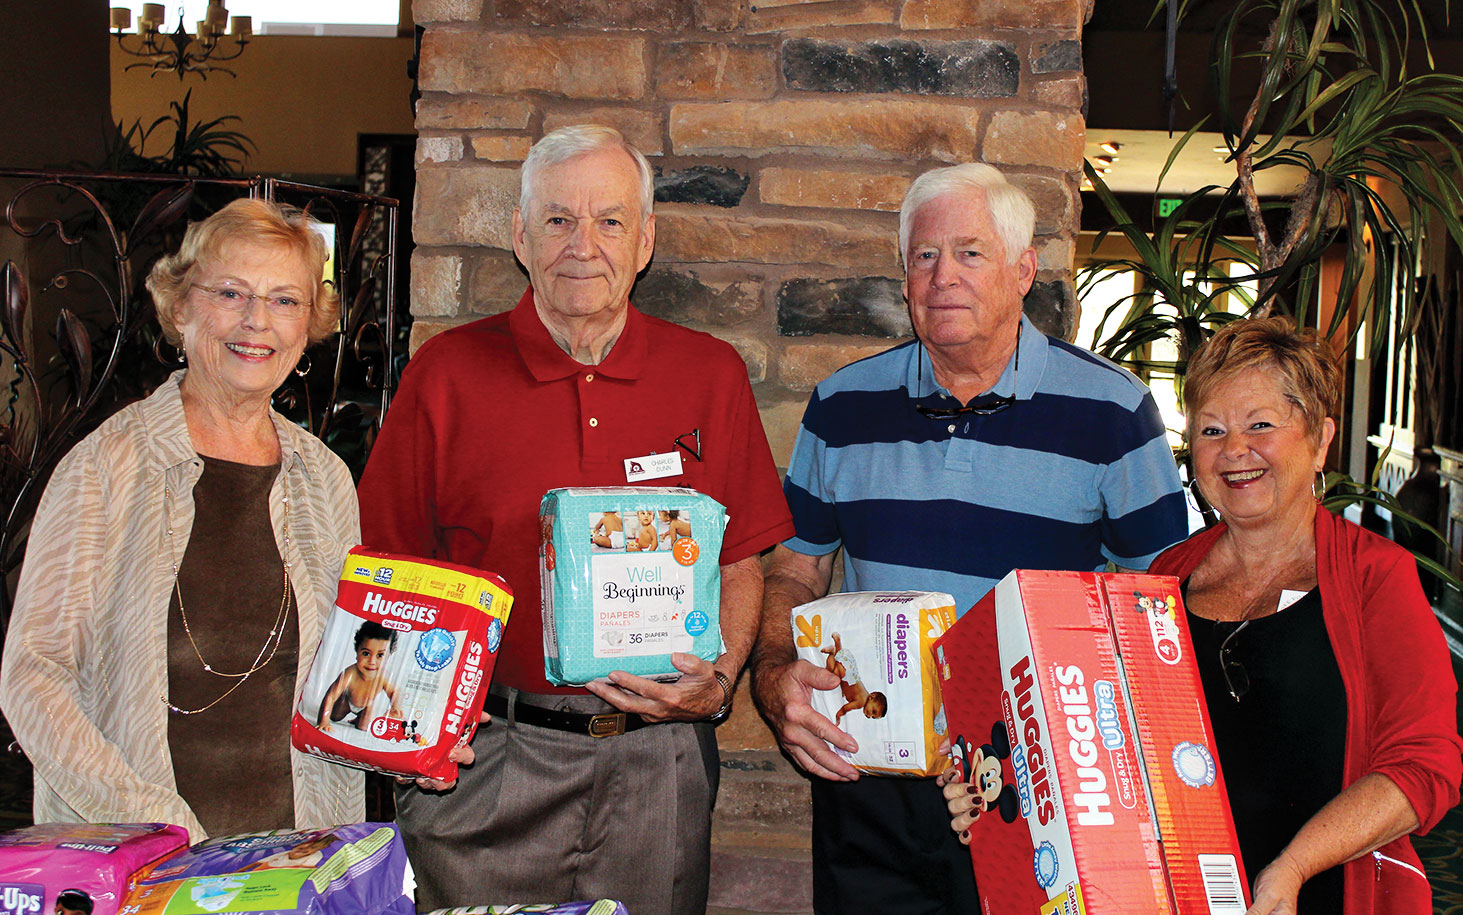 Shown with packages of diapers are Wanda Hutchison, Charles Dunn, Steve Carnahan and Sharon Sneen; photo by Clayton Thomas.